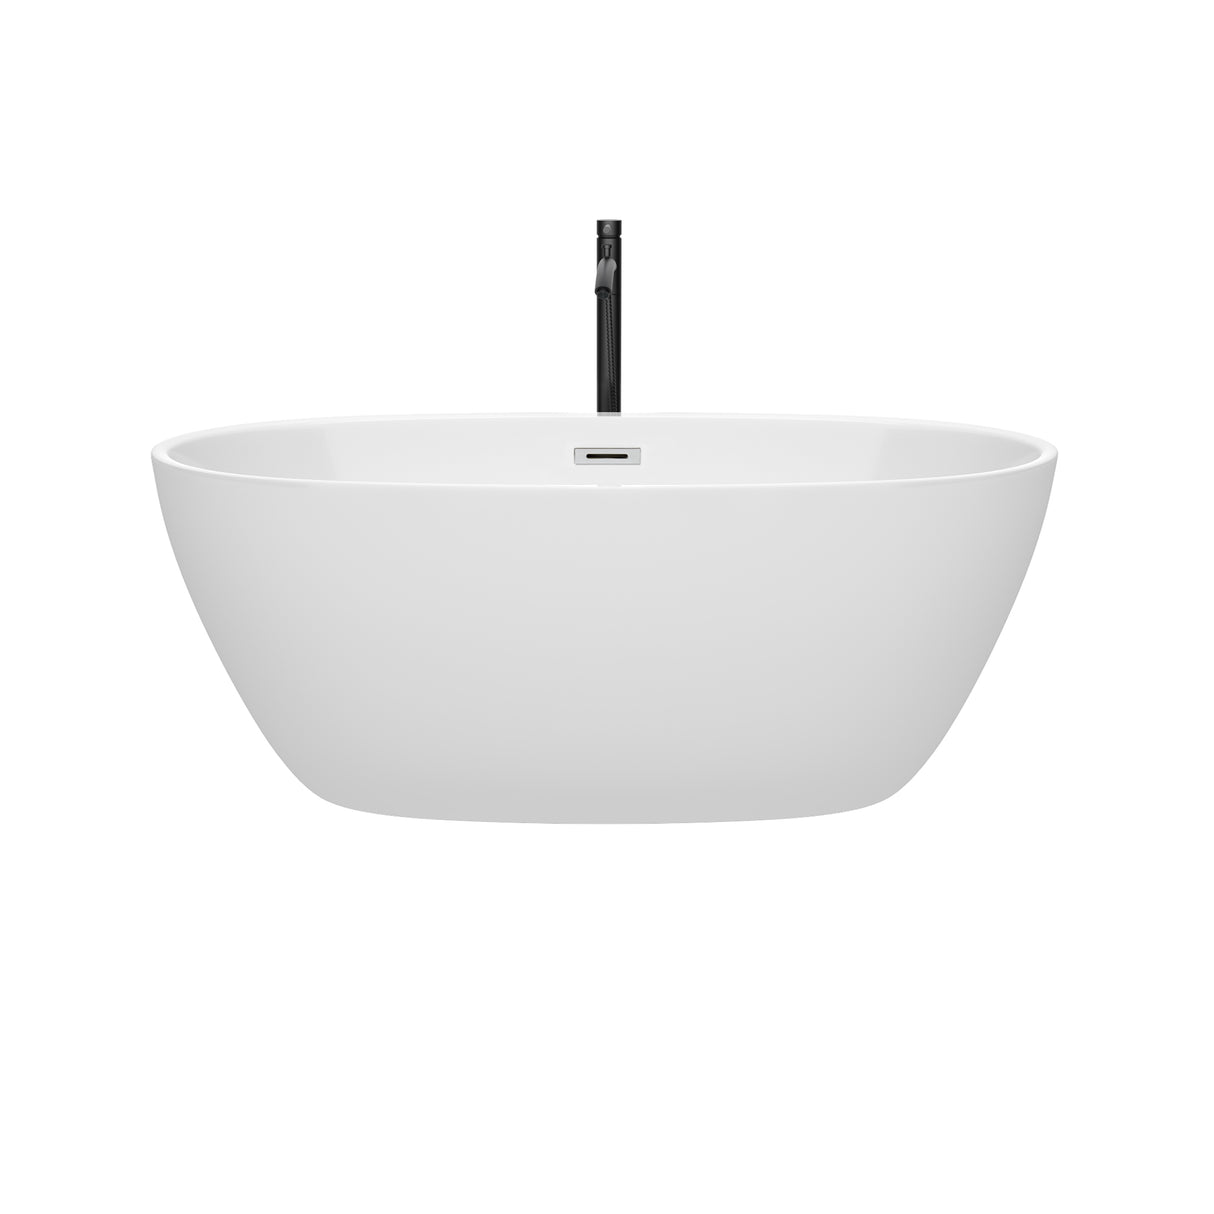 Juno 59 Inch Freestanding Bathtub in White with Polished Chrome Trim and Floor Mounted Faucet in Matte Black